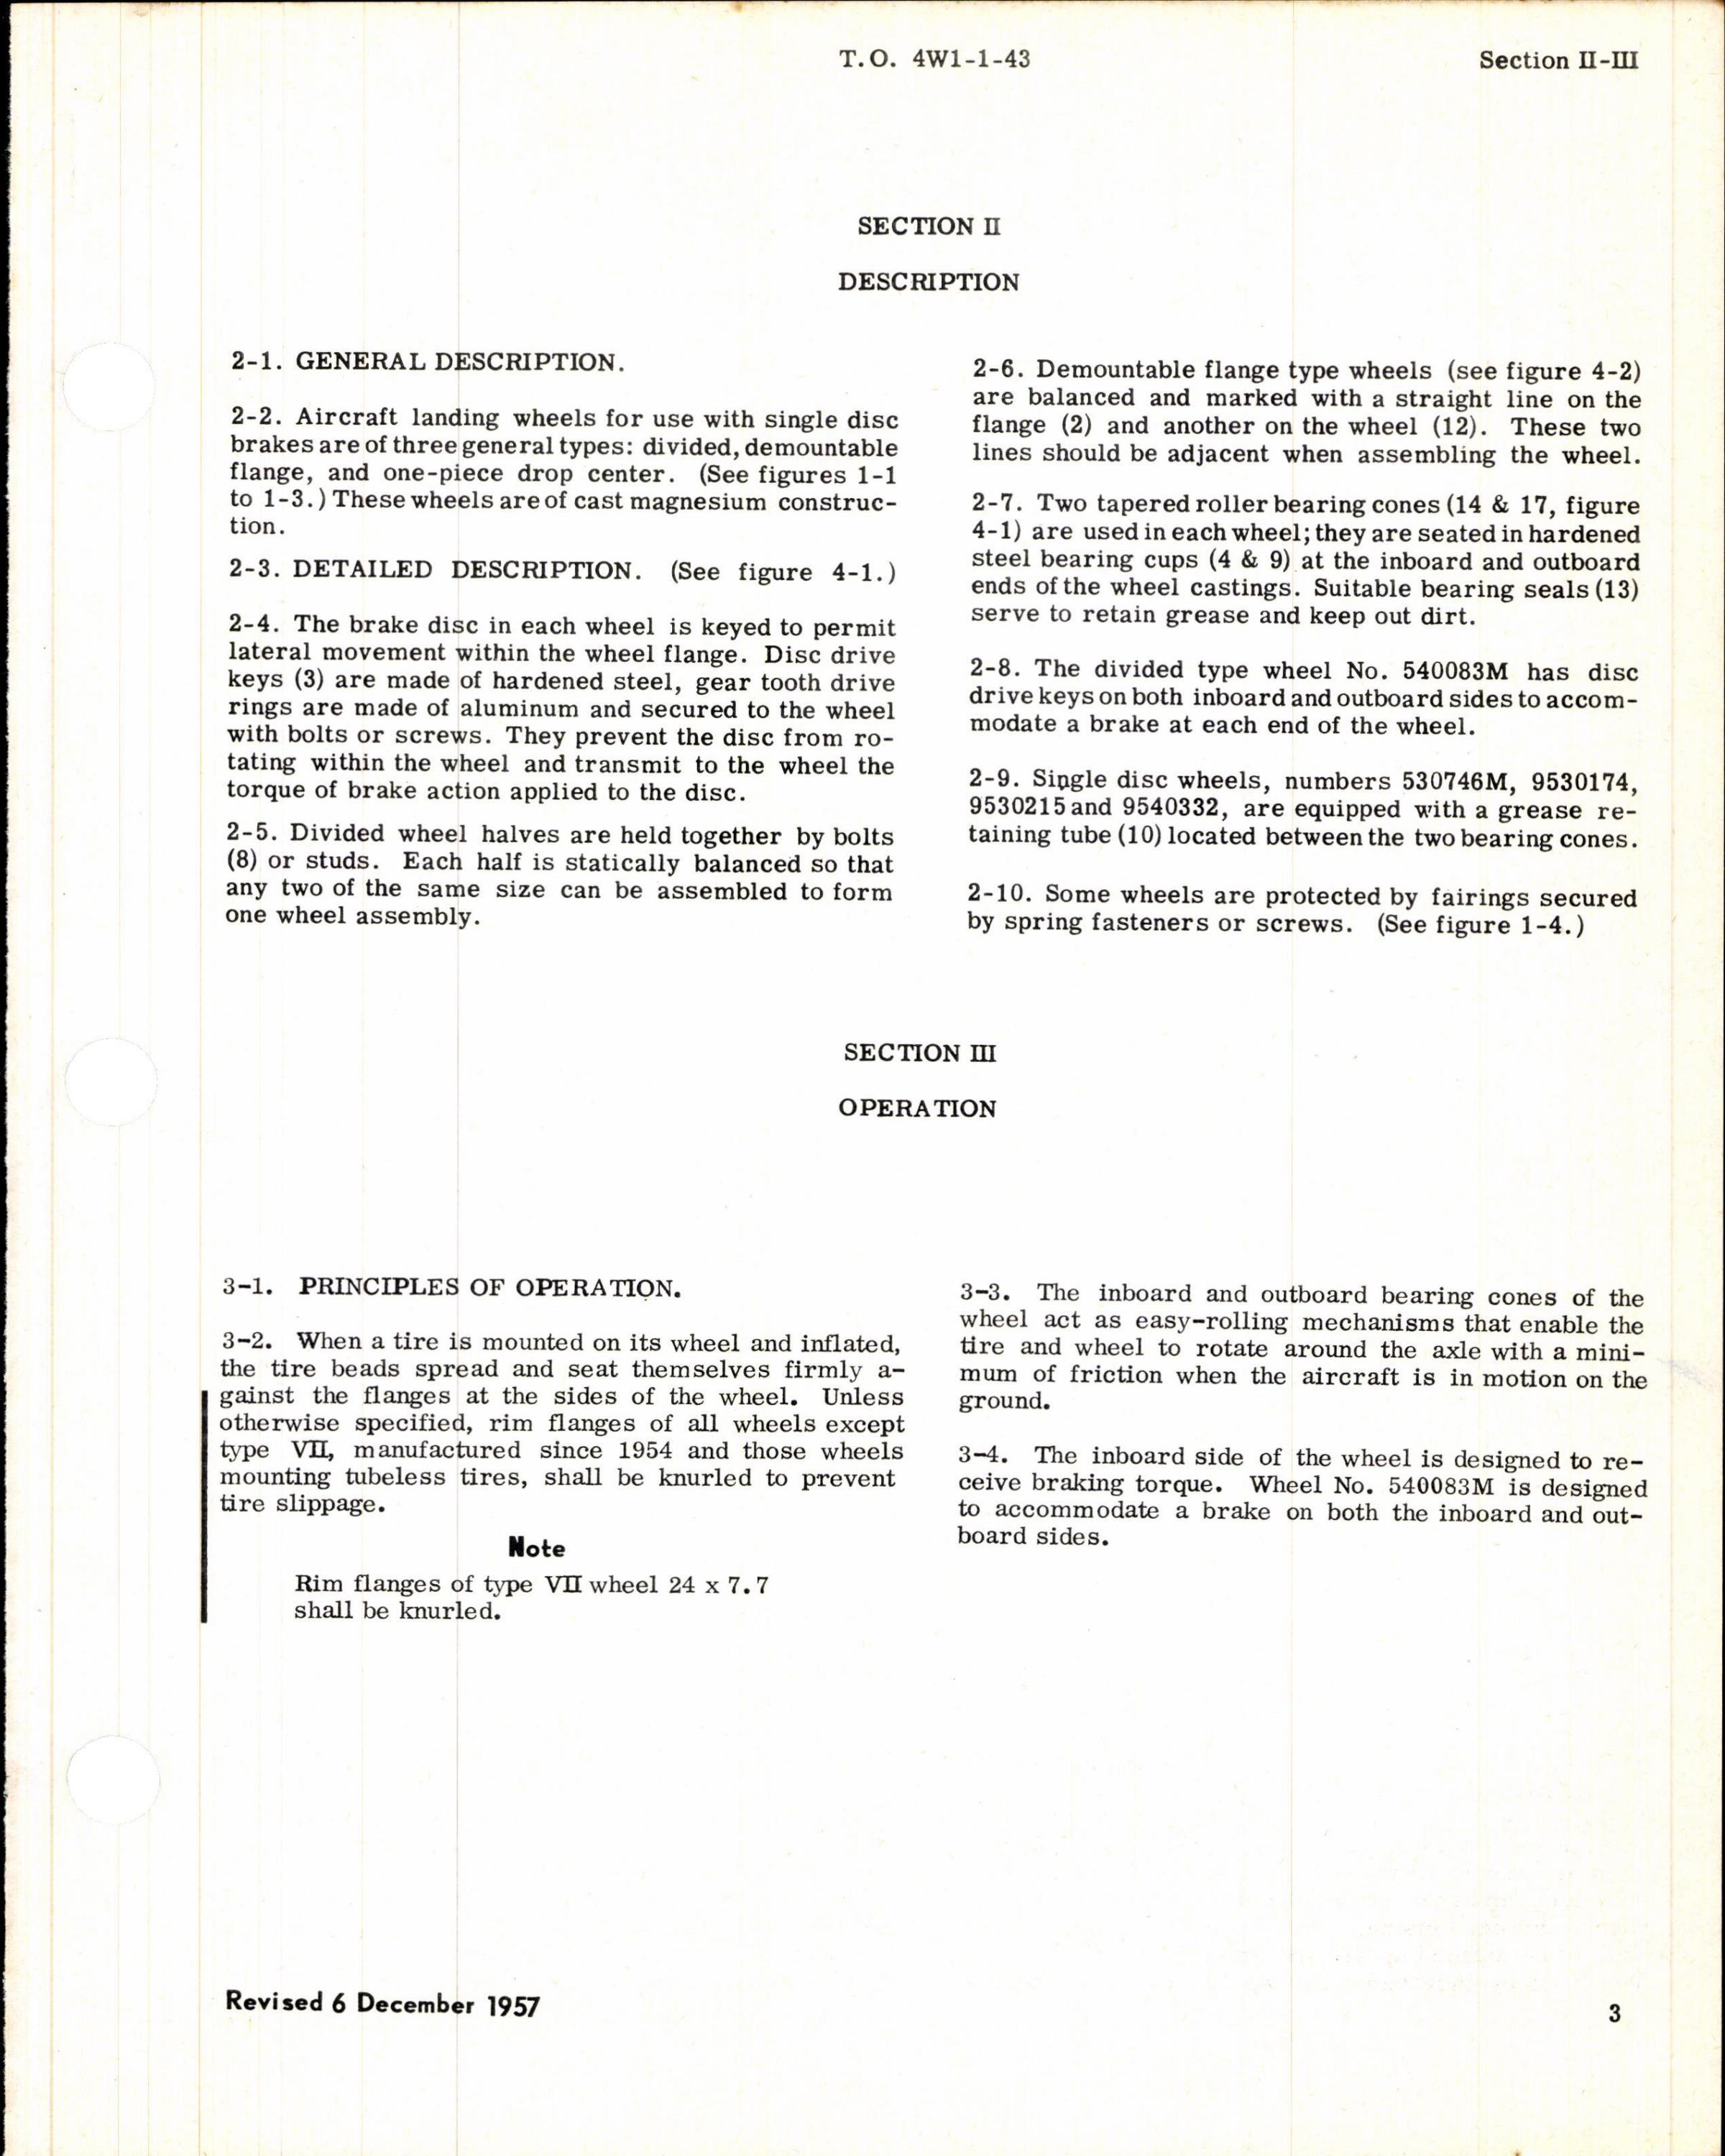 Sample page 3 from AirCorps Library document: Overhaul Instructions for Goodyear Landing Wheels - Single Disk Brake Type